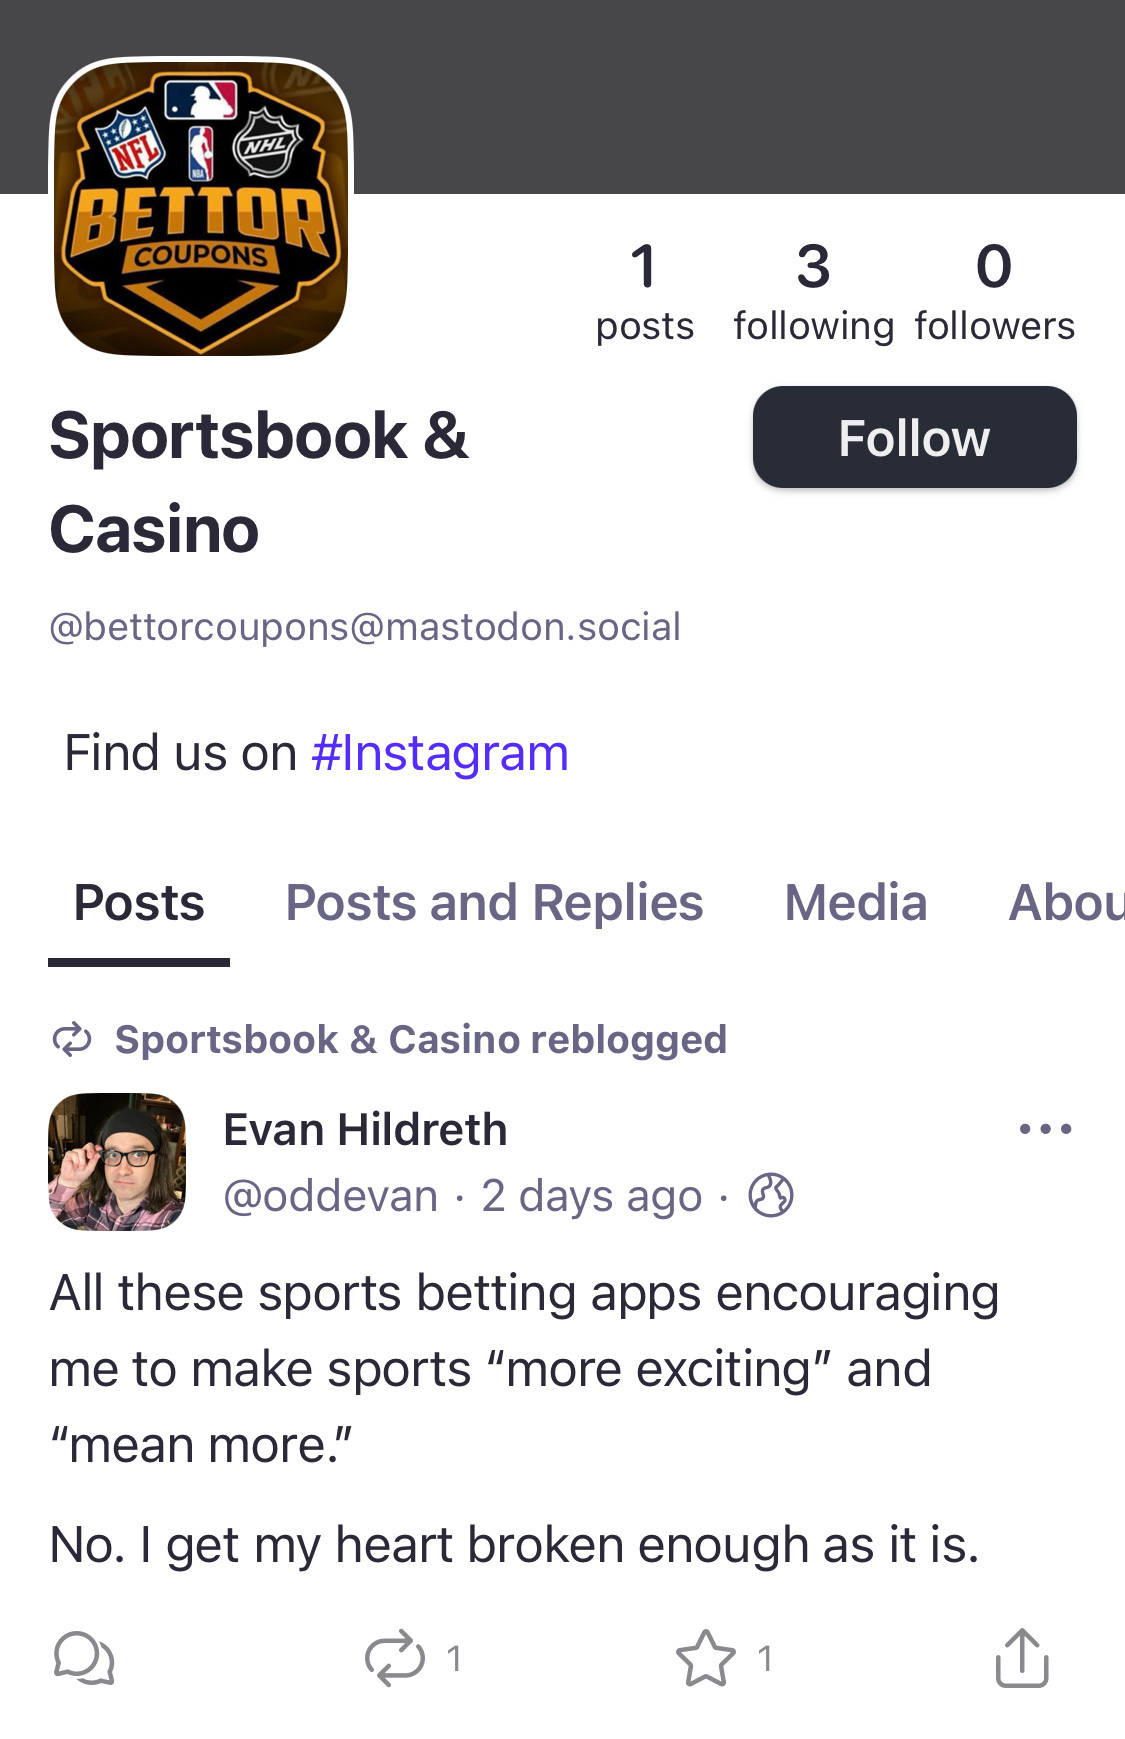 A screenshot of a mastodon profile dedicated to sports gambling that reblogged my earlier post about how I will not be gambling on sports.